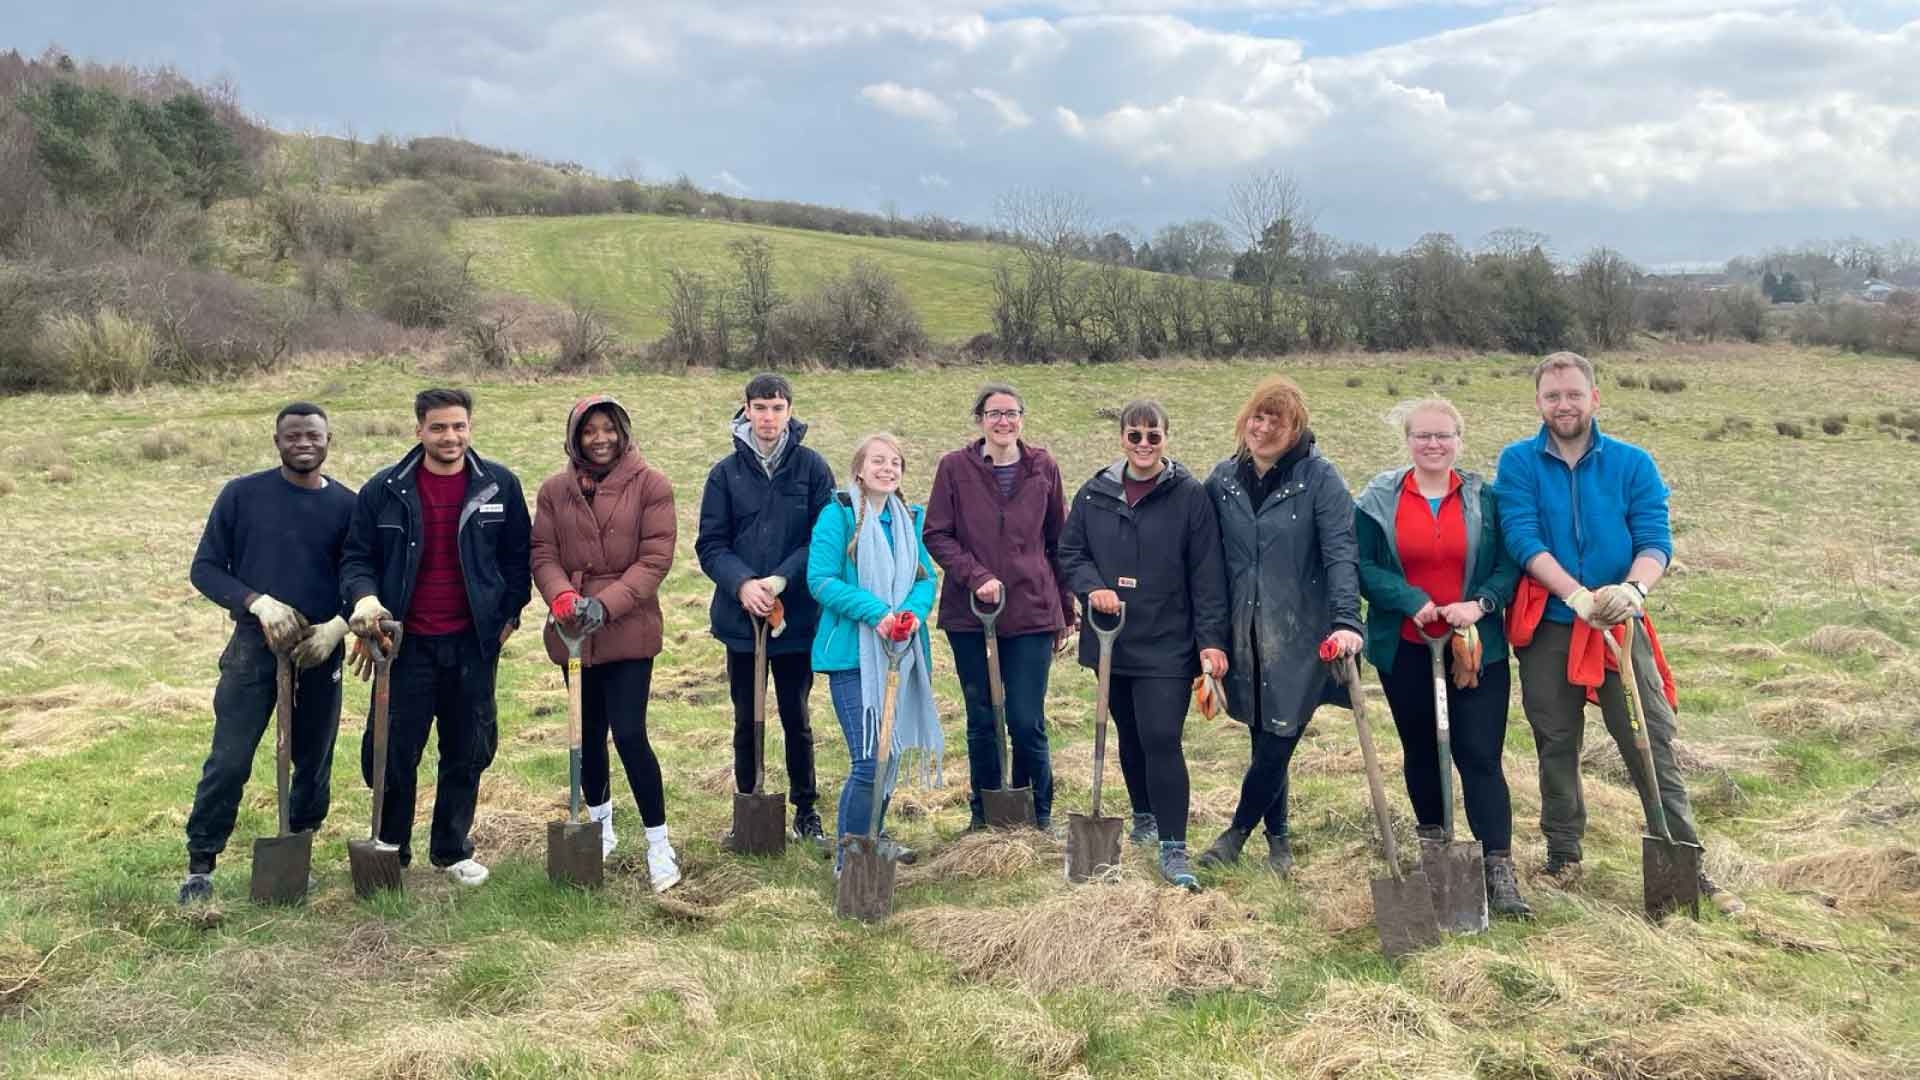 Strathclyde students and staff in the countryside, holding tree planting equipment and smiling at the camera.